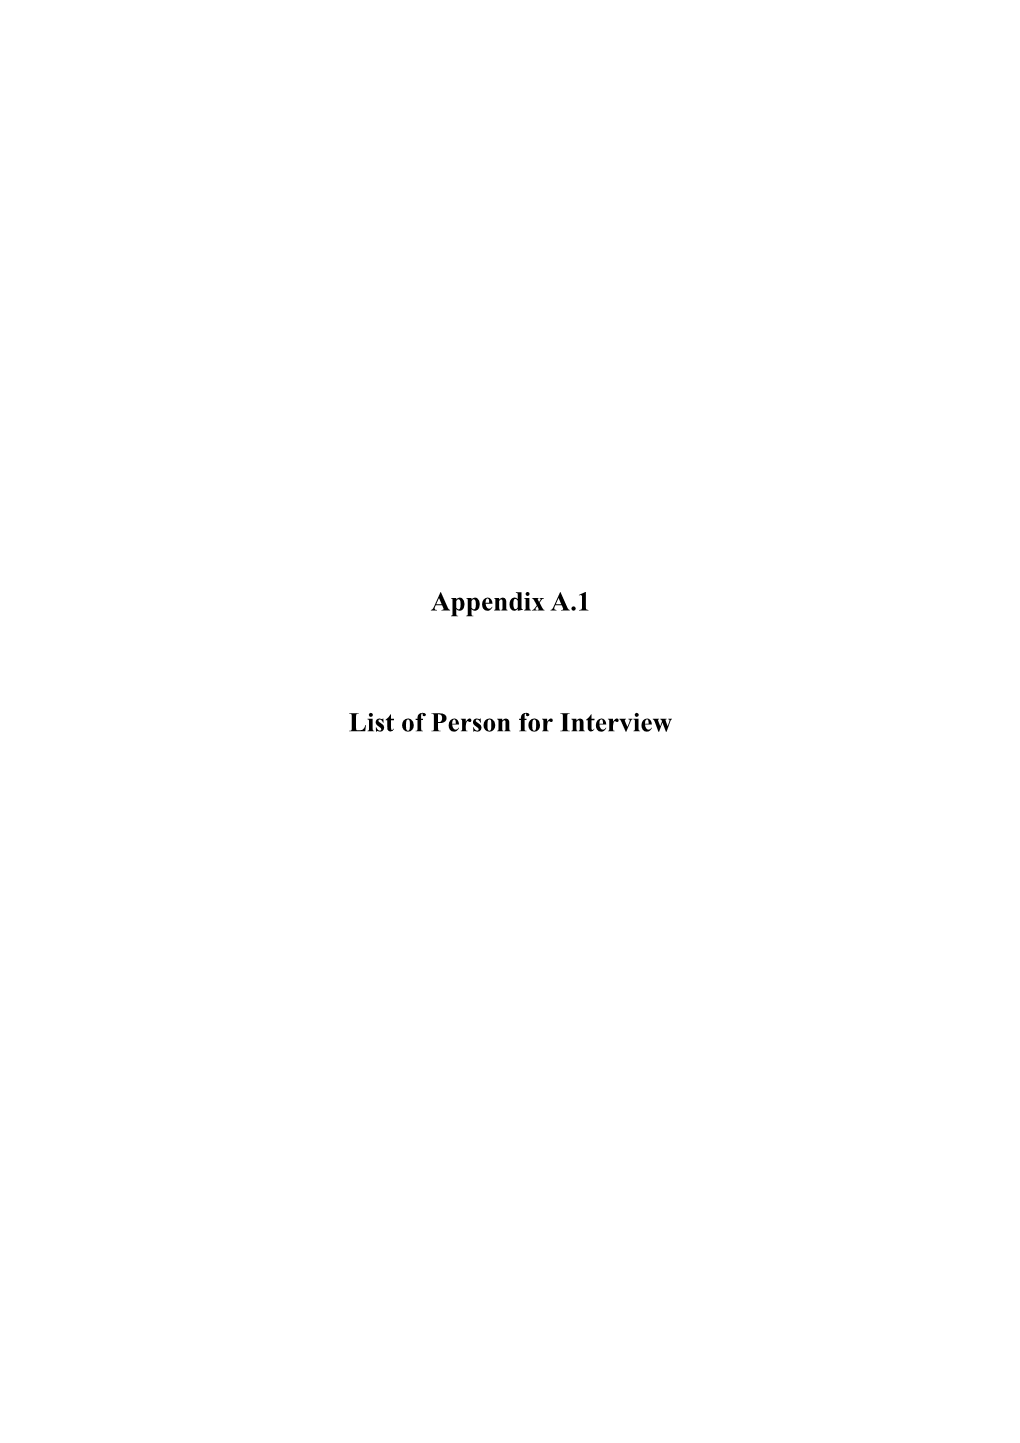 Appendix A.1 List of Person for Interviews I